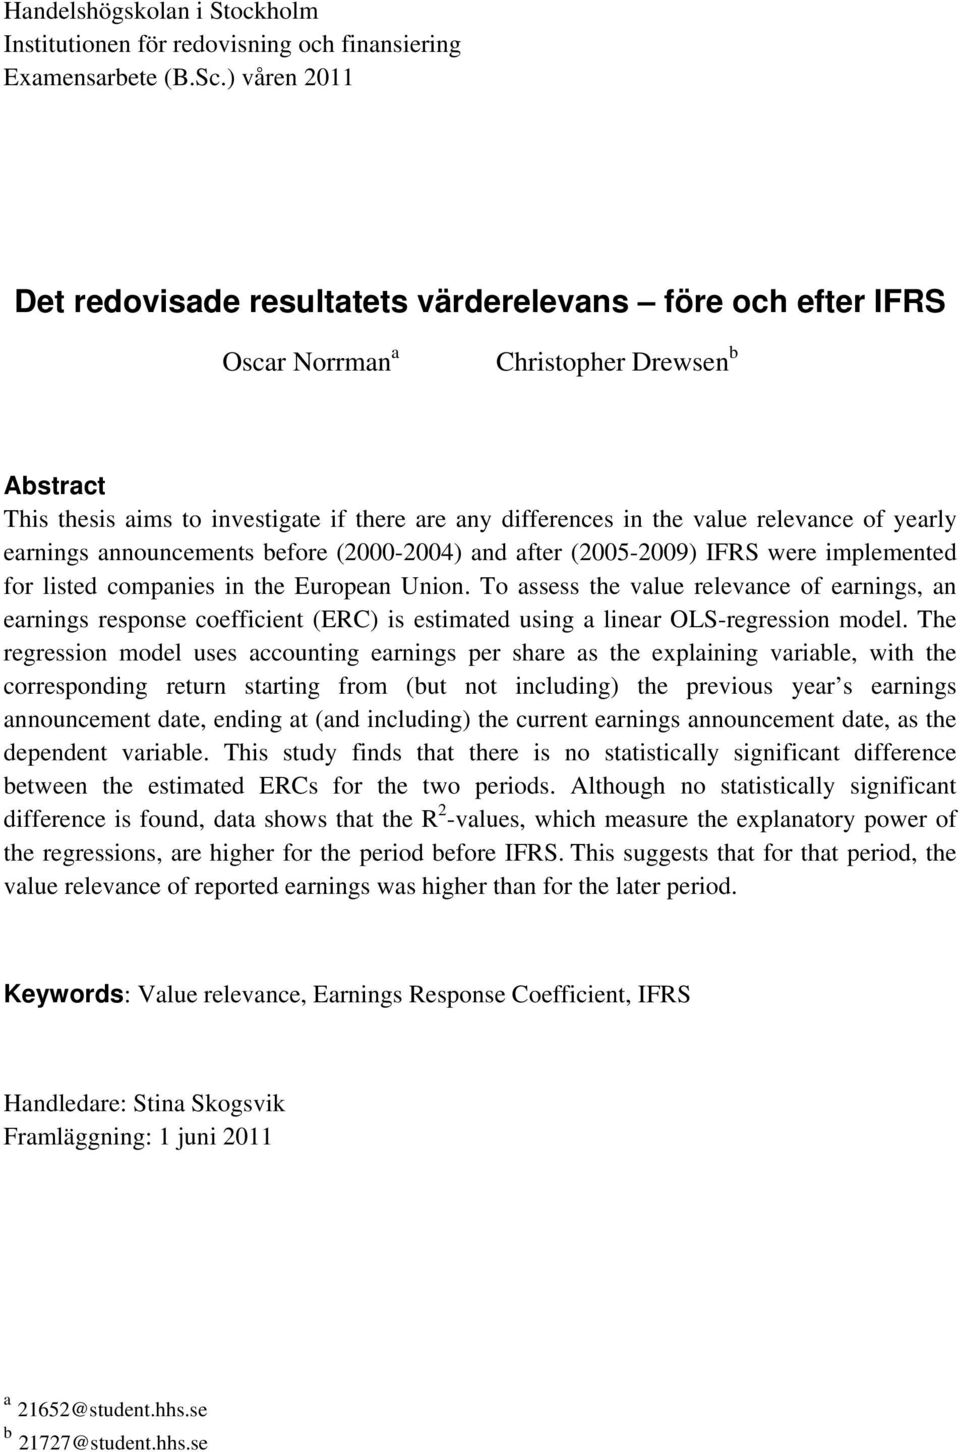 relevance of yearly earnings announcements before (2000-2004) and after (2005-2009) IFRS were implemented for listed companies in the European Union.